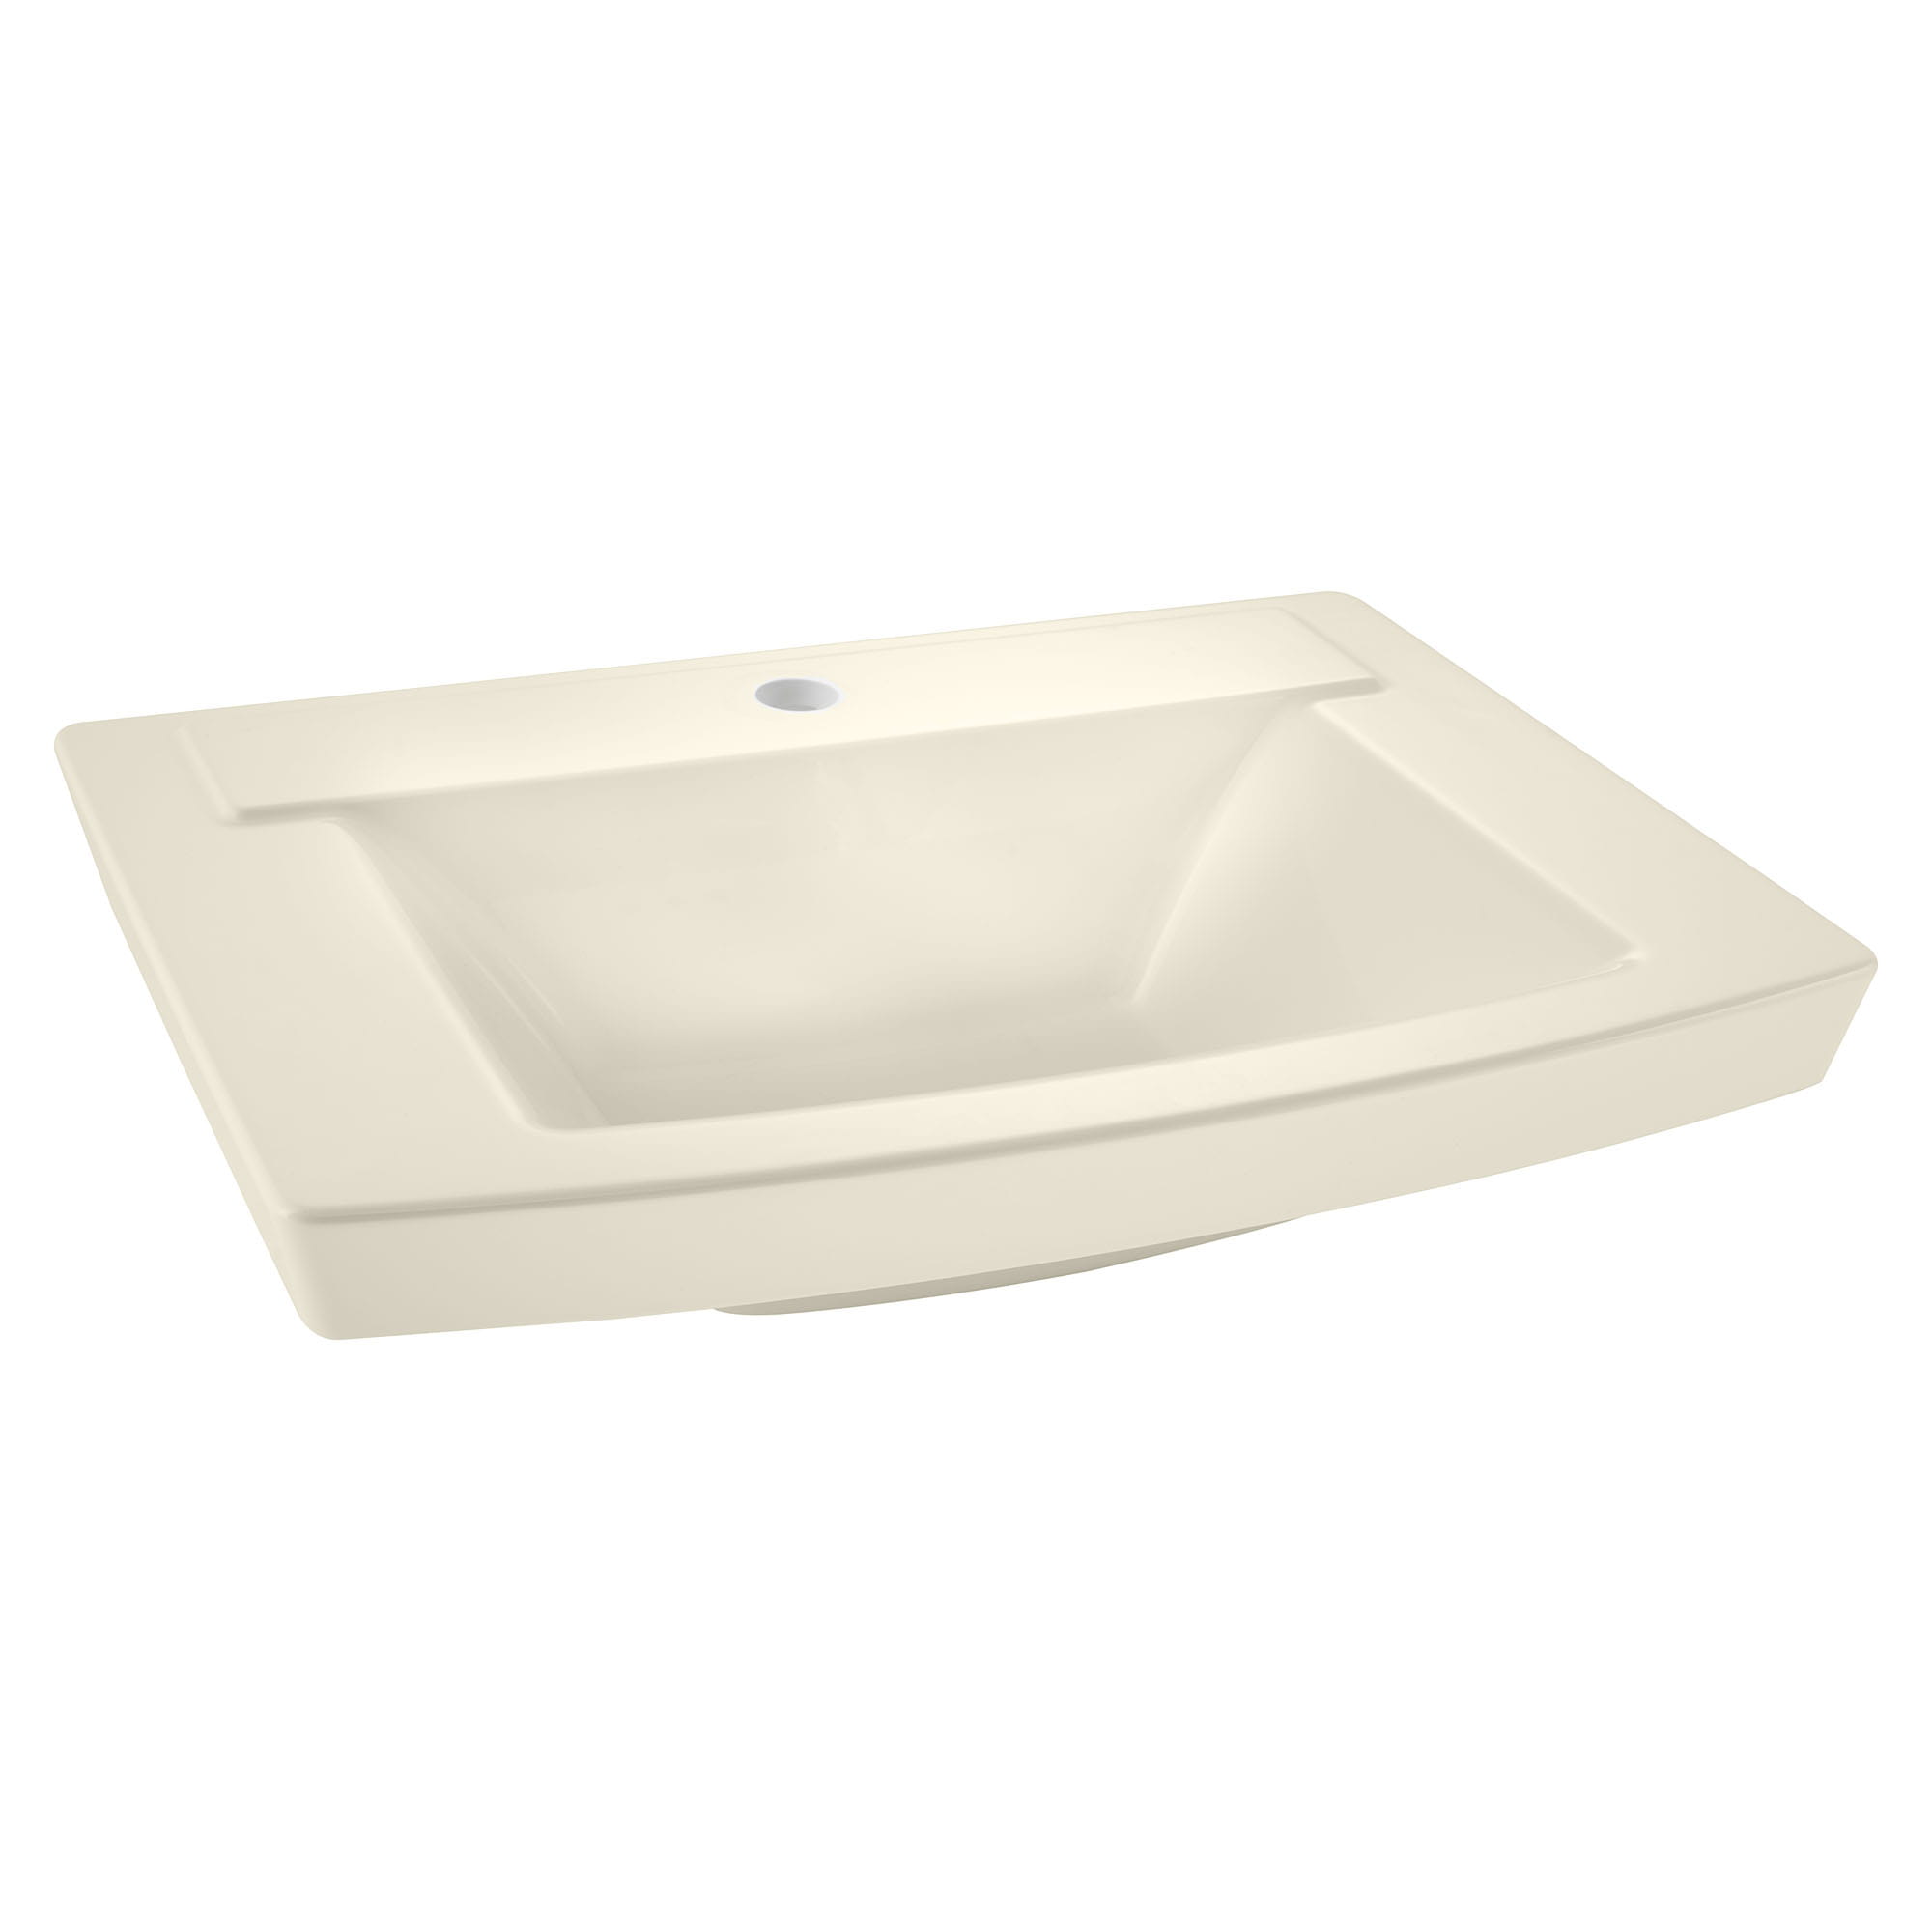 Townsend™ 24 x 18-Inch Above Counter Sink With Center Hole Only